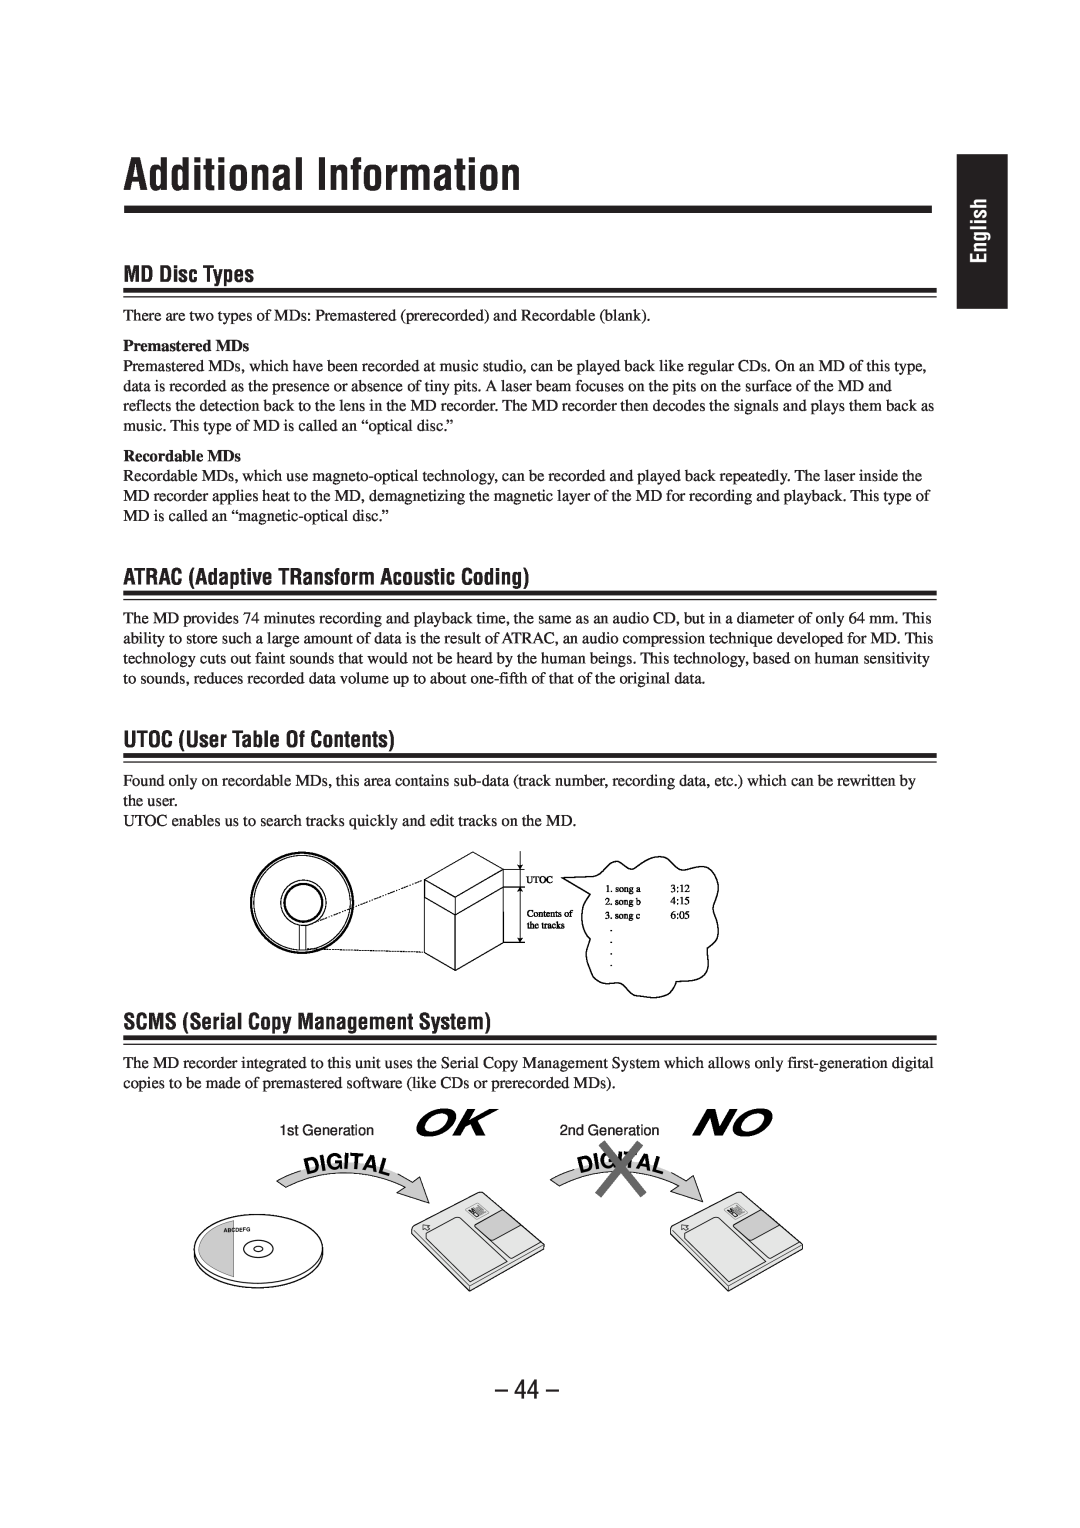 JVC CA-MD70 Additional Information, MD Disc Types, ATRAC Adaptive TRansform Acoustic Coding, UTOC User Table Of Contents 